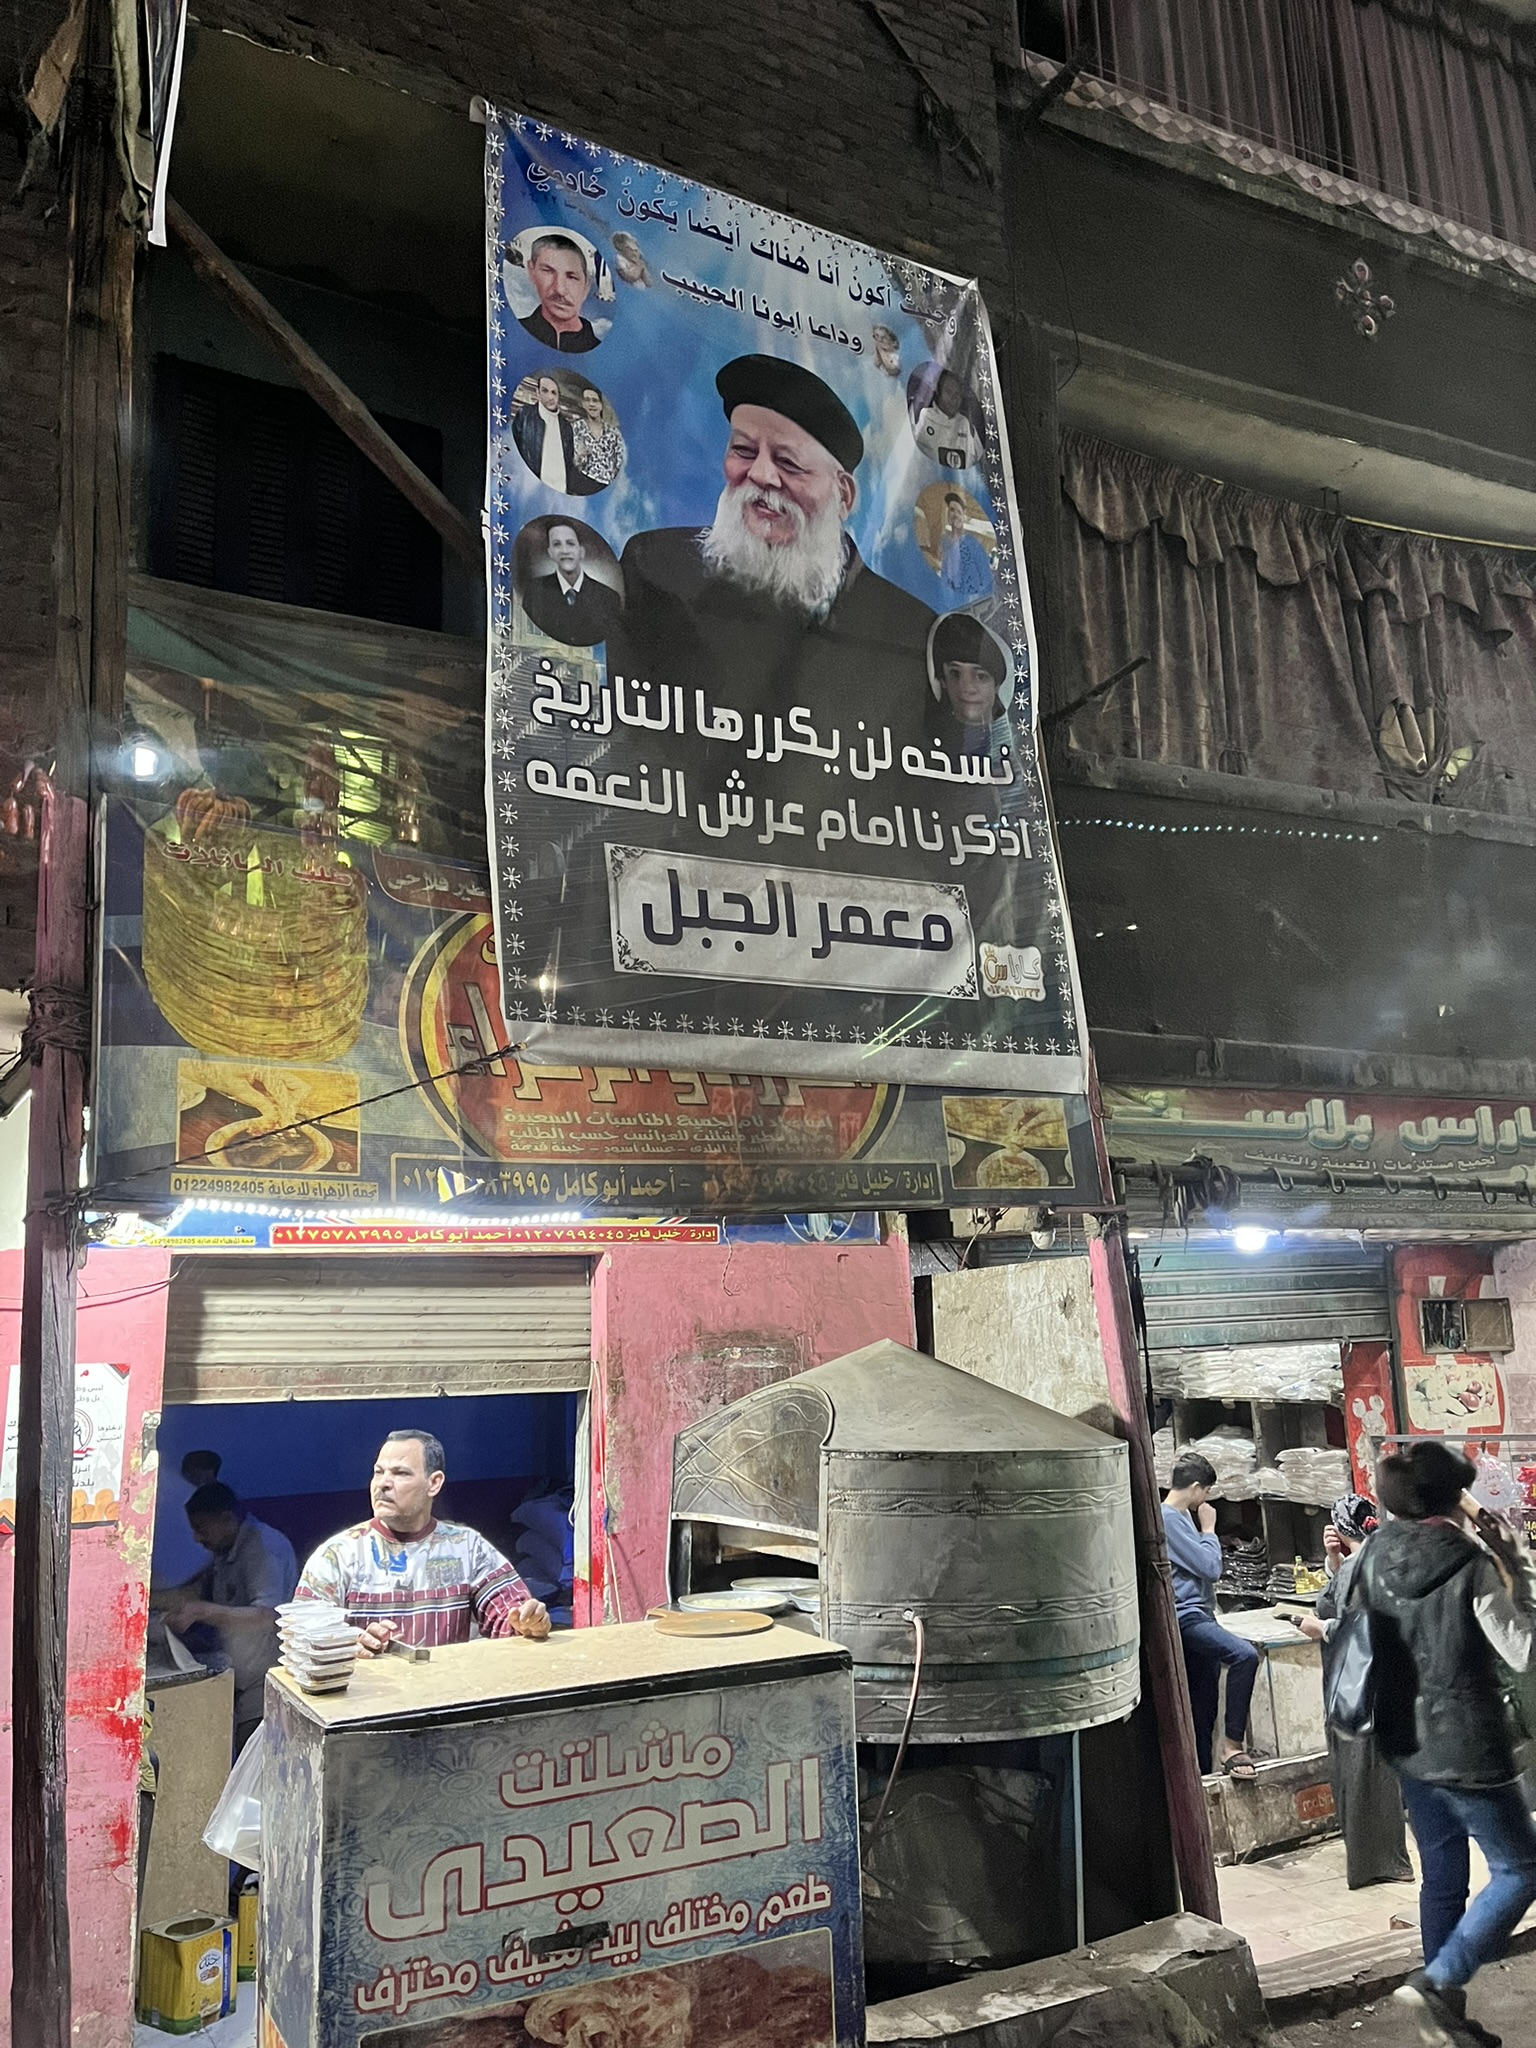 A street seller stands at a booth below a poster of a priest.